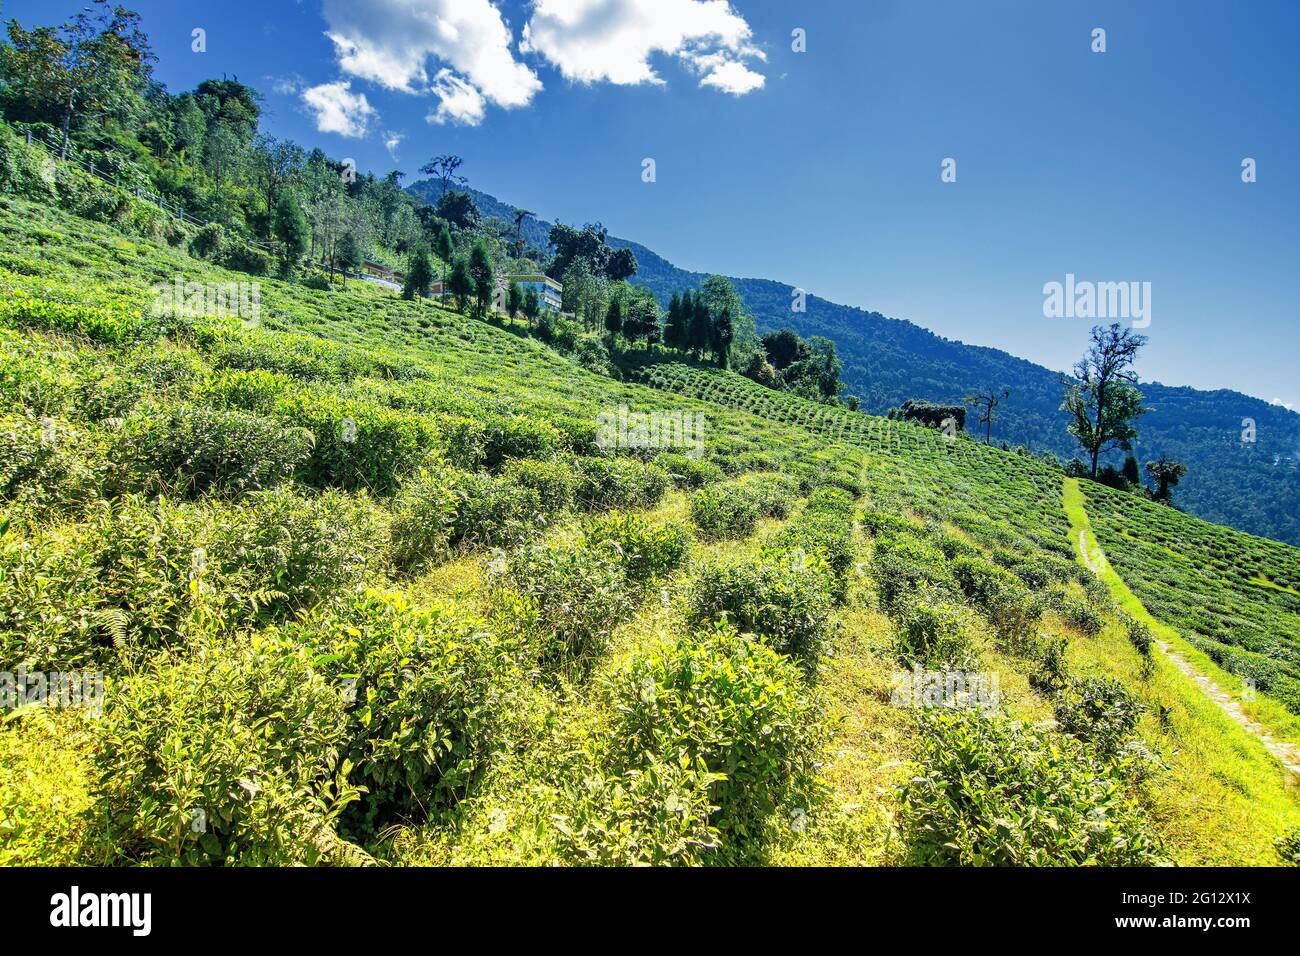 Temi tea garden of Ravangla, Sikkim, beautiful vast tea planatation on greadully sloping field with mountains and blue sky in the background. It is on Stock Photo